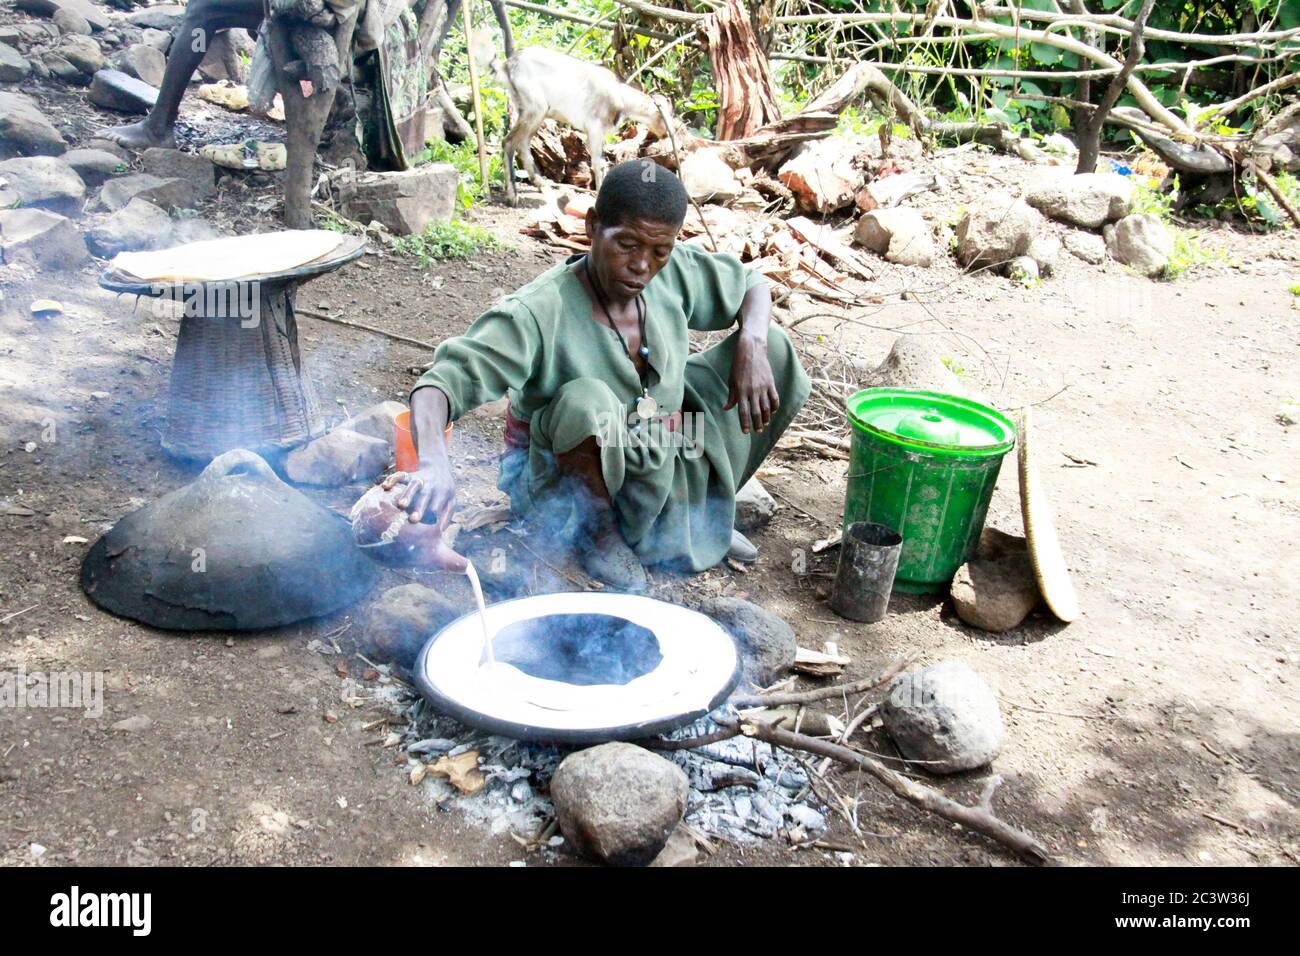 Africa, Ethiopia, Lalibela, Woman cooks Injera (Injera is a sourdough-risen flatbread with a unique, slightly spongy texture. Traditionally made out o Stock Photo